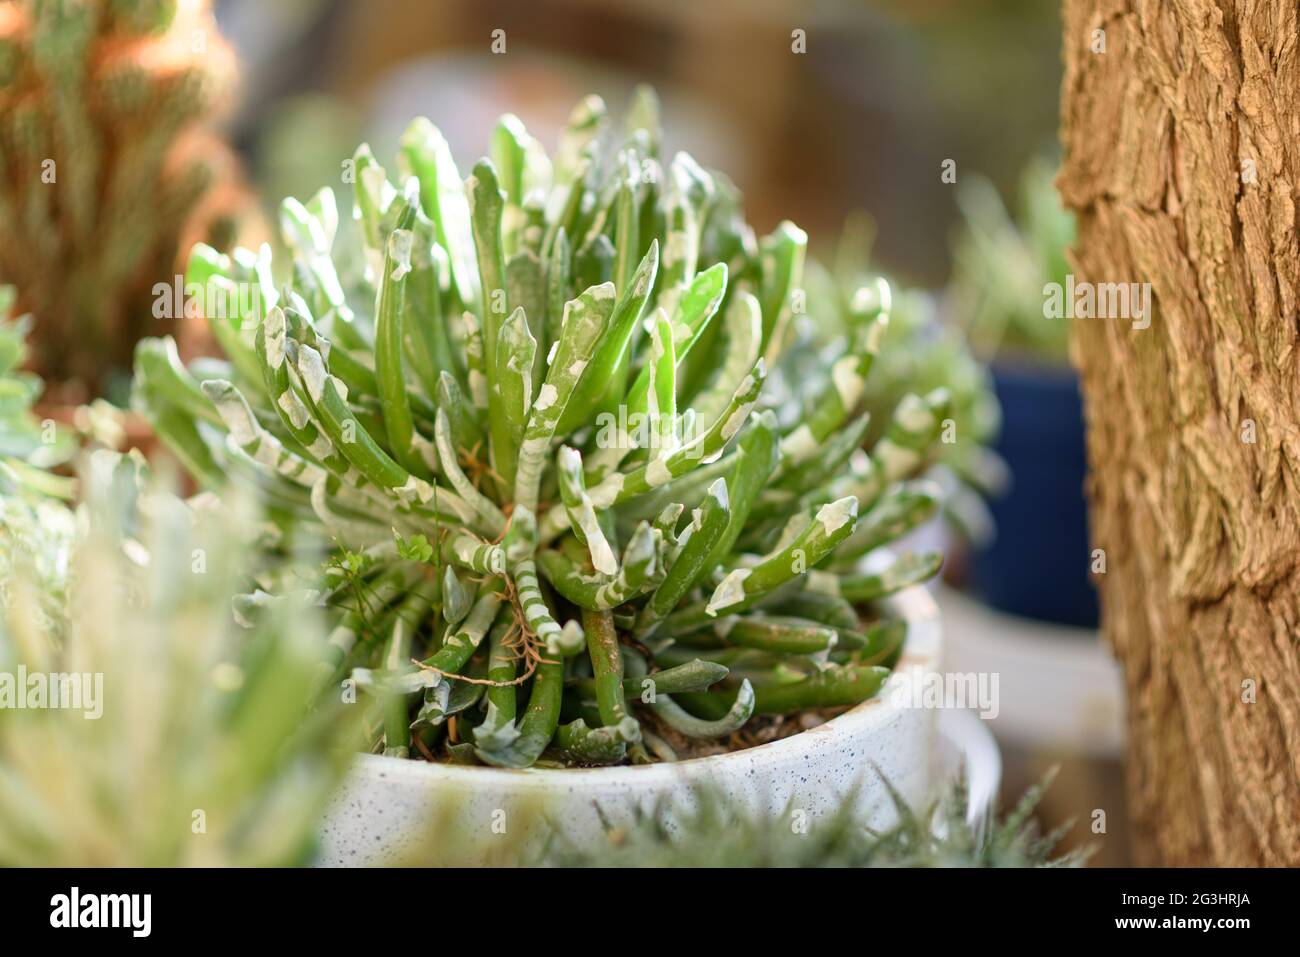 Succulent in flower pot outdoors. Senecio is a genus of flowering plant in the daisy family. Stock Photo